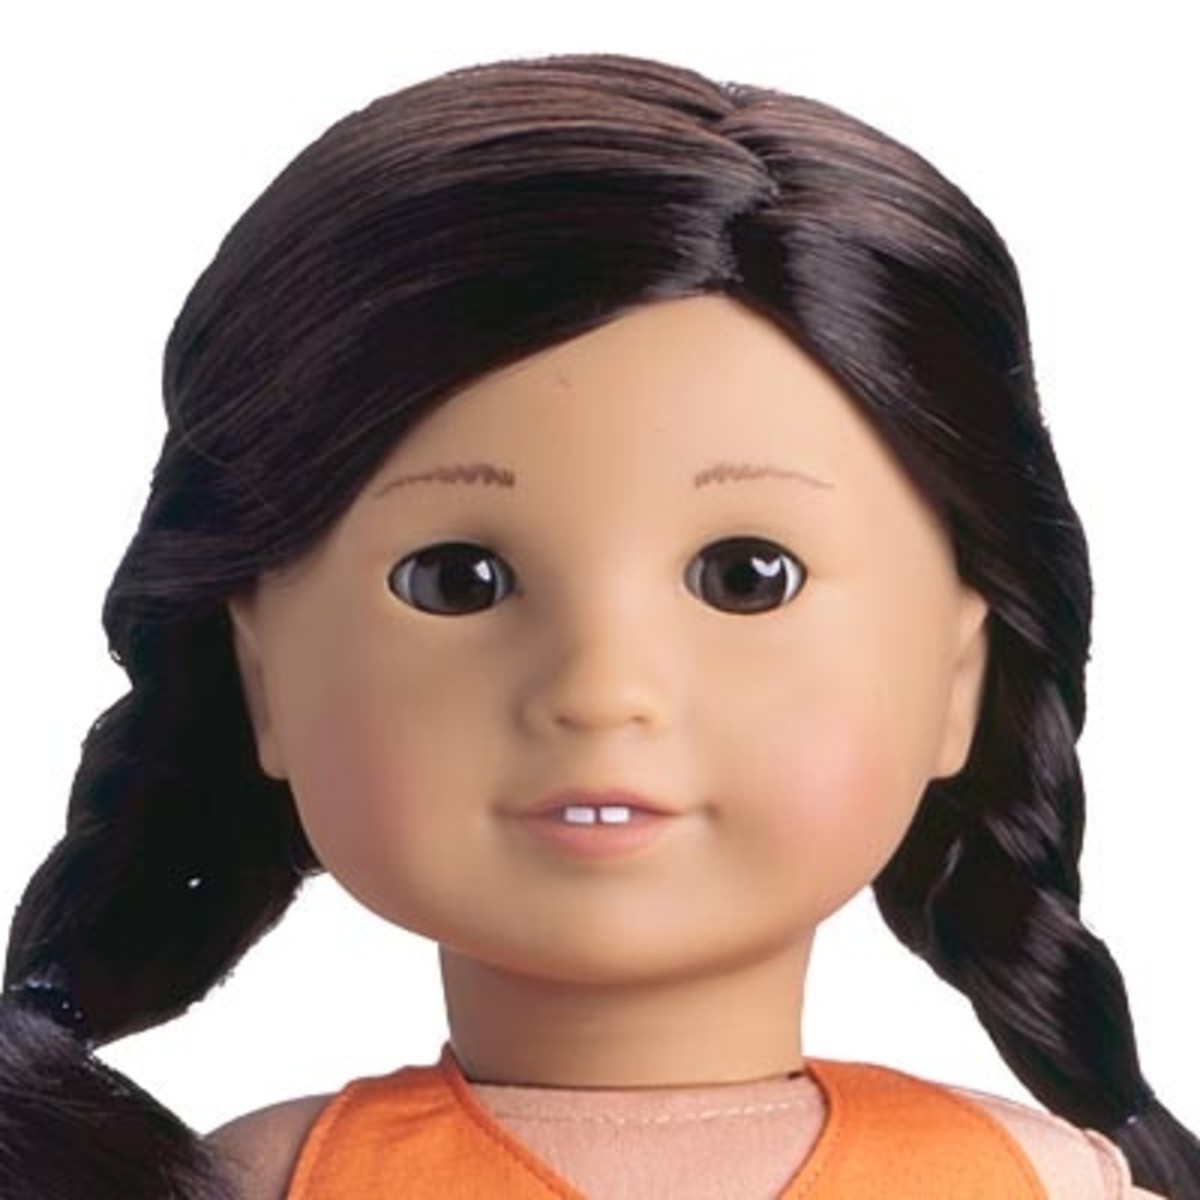 Jess Mold Dolls From American Girl: Comparison